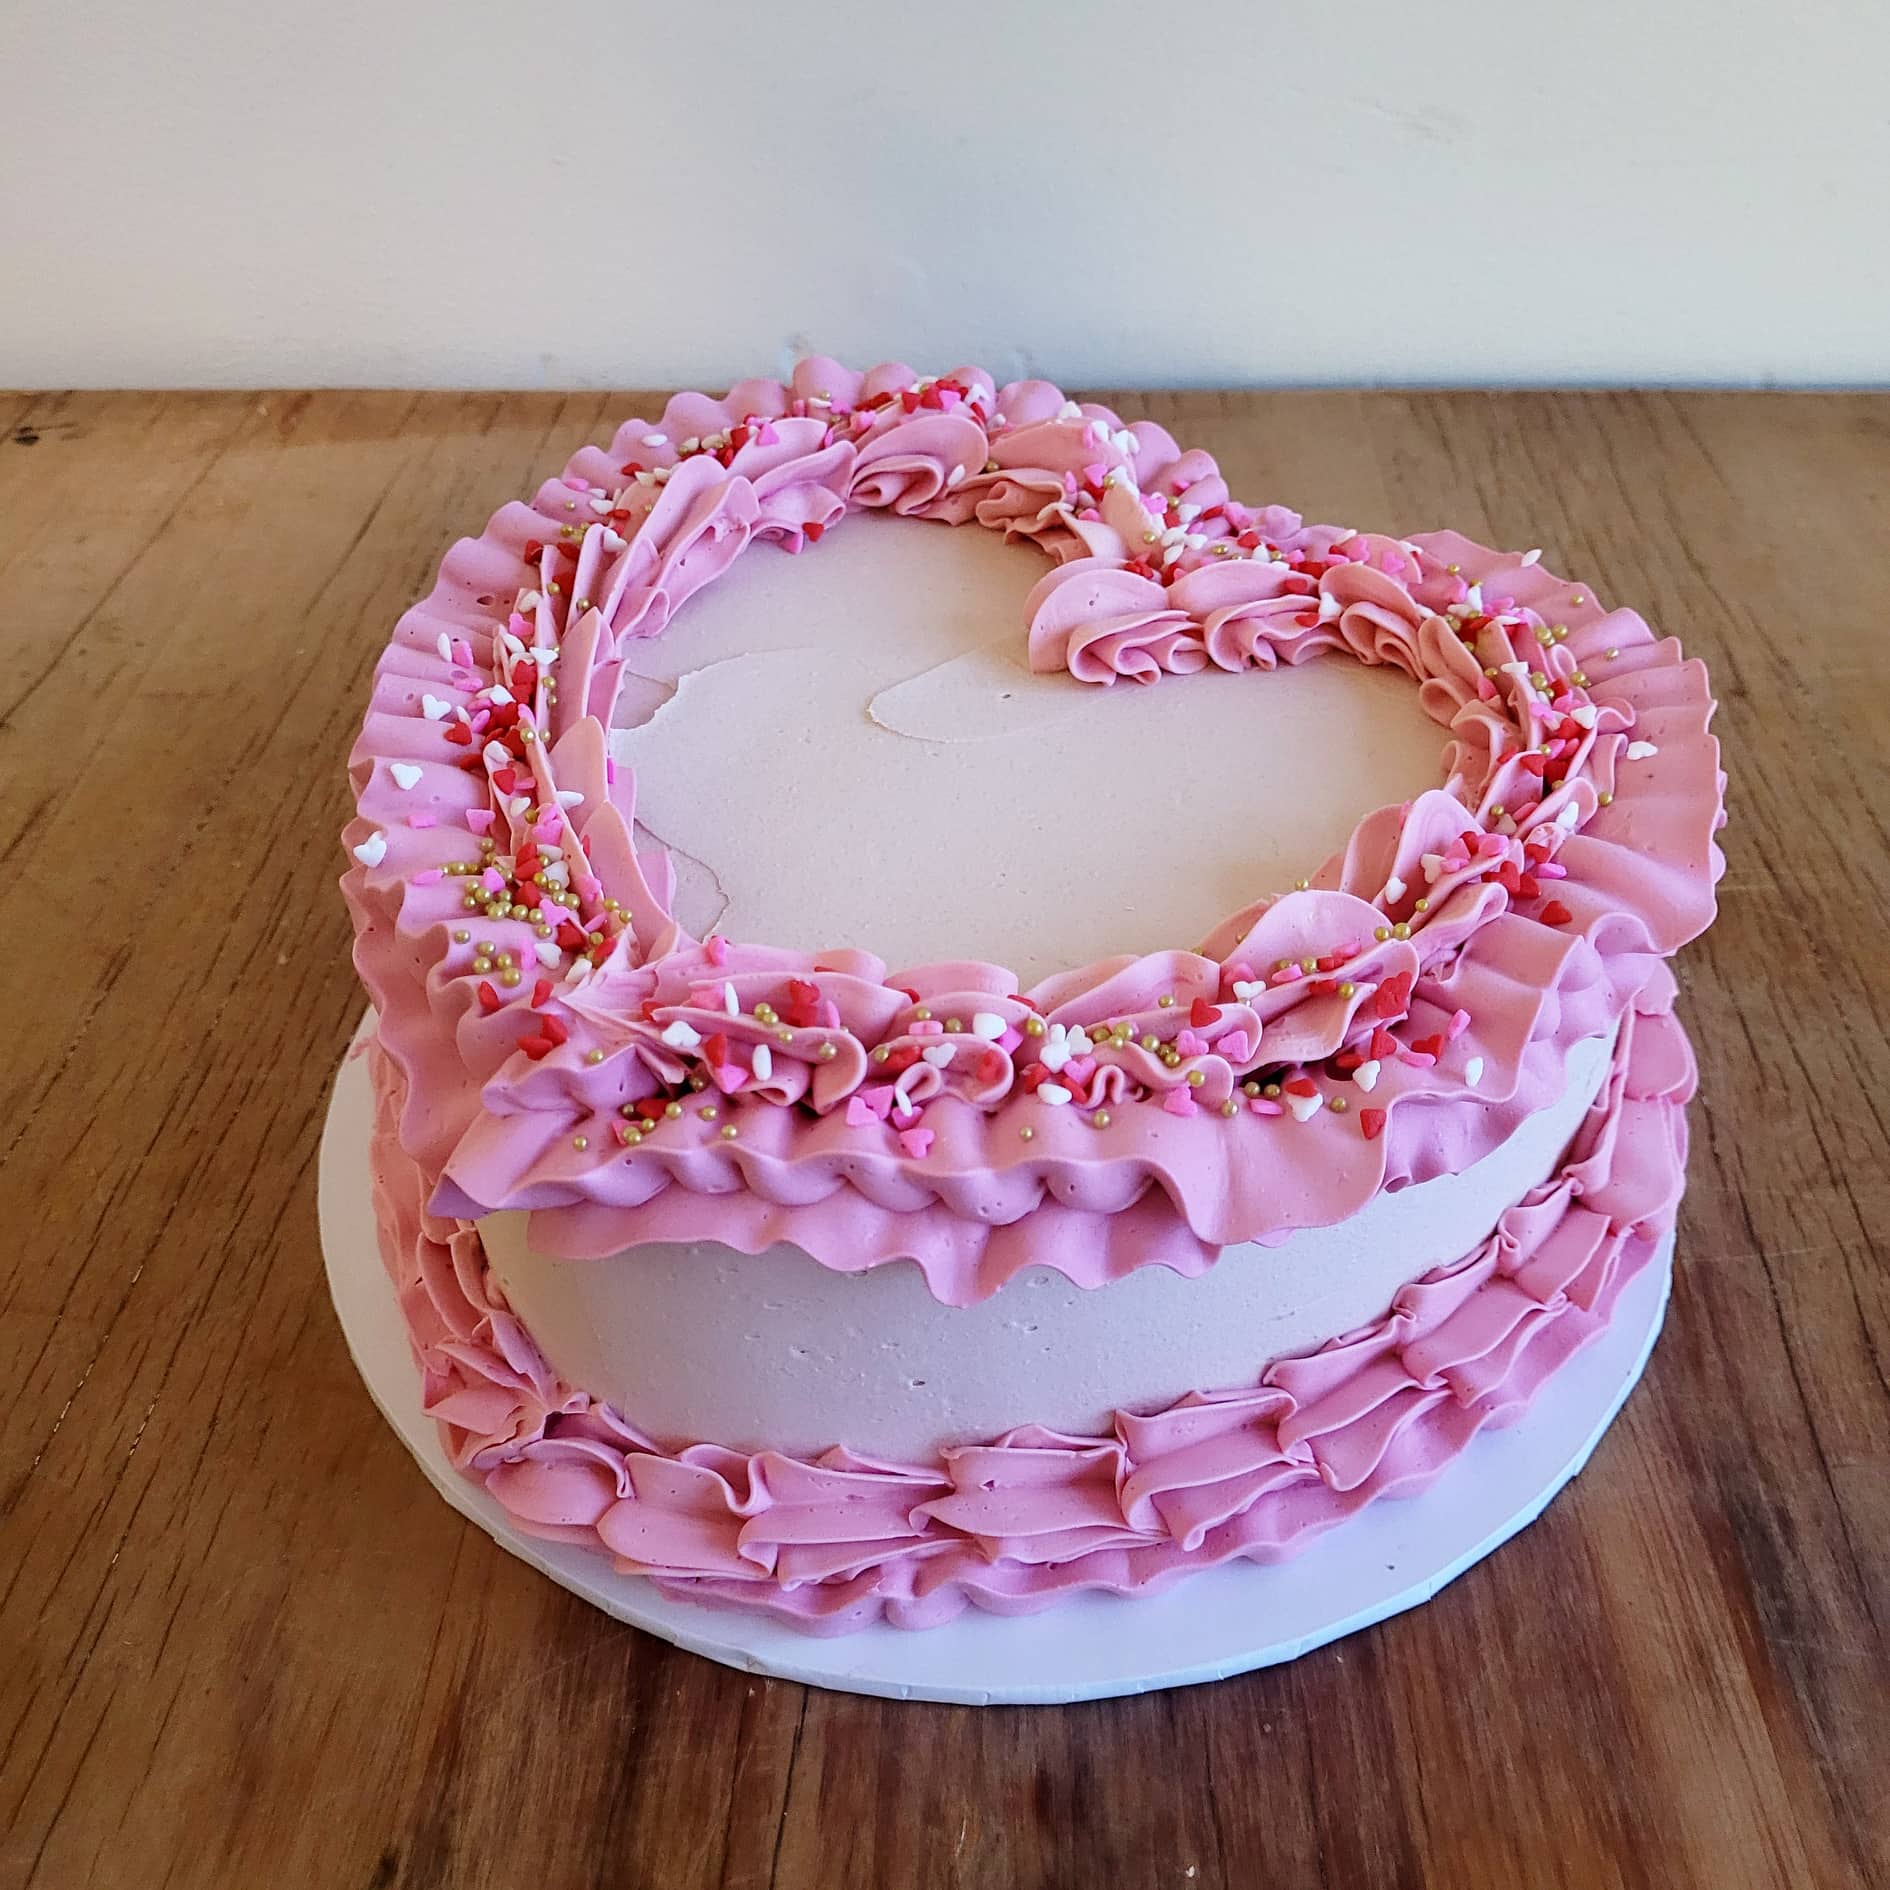 Purple candy heart cake - Decorated Cake by Sugar-pie - CakesDecor